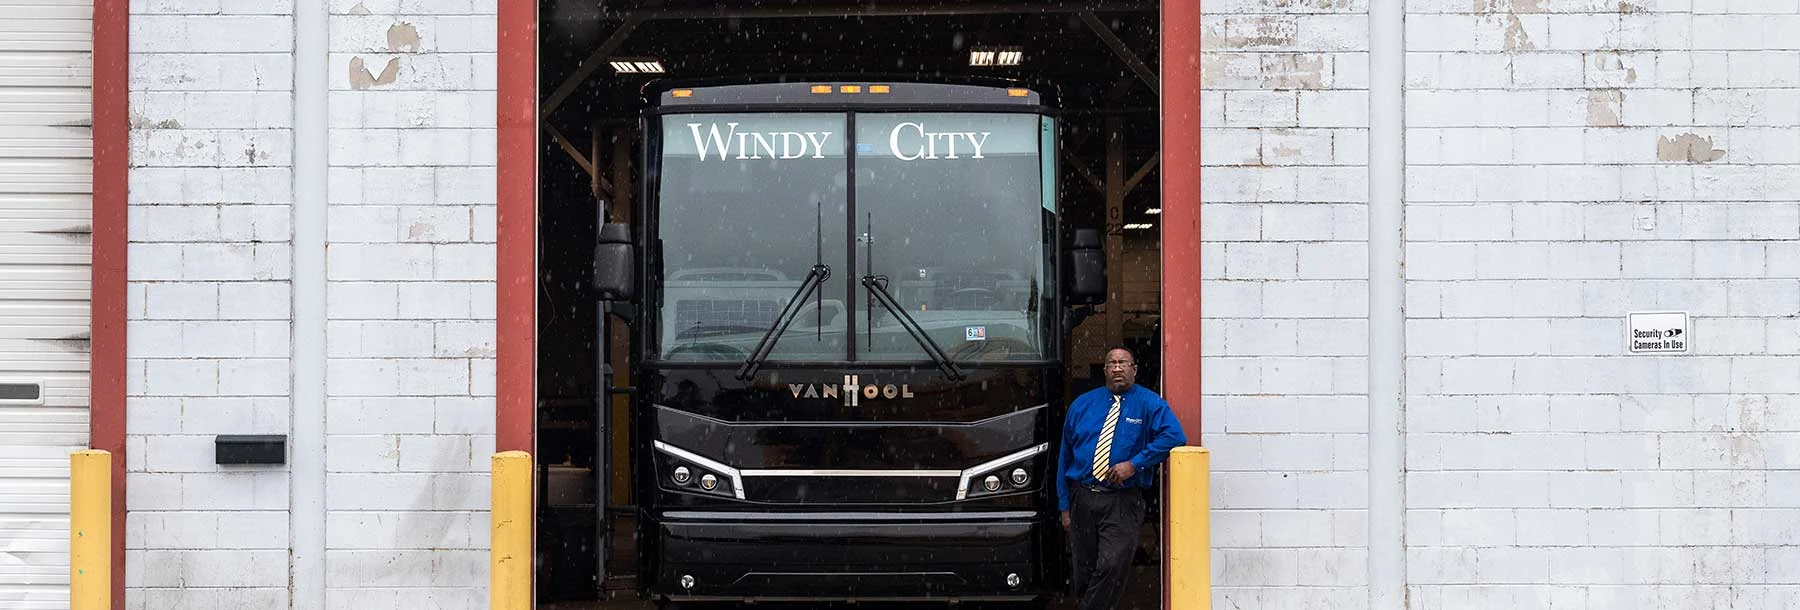 Windy City Limousine reduces dispatch call volume by 30% with real-time data 